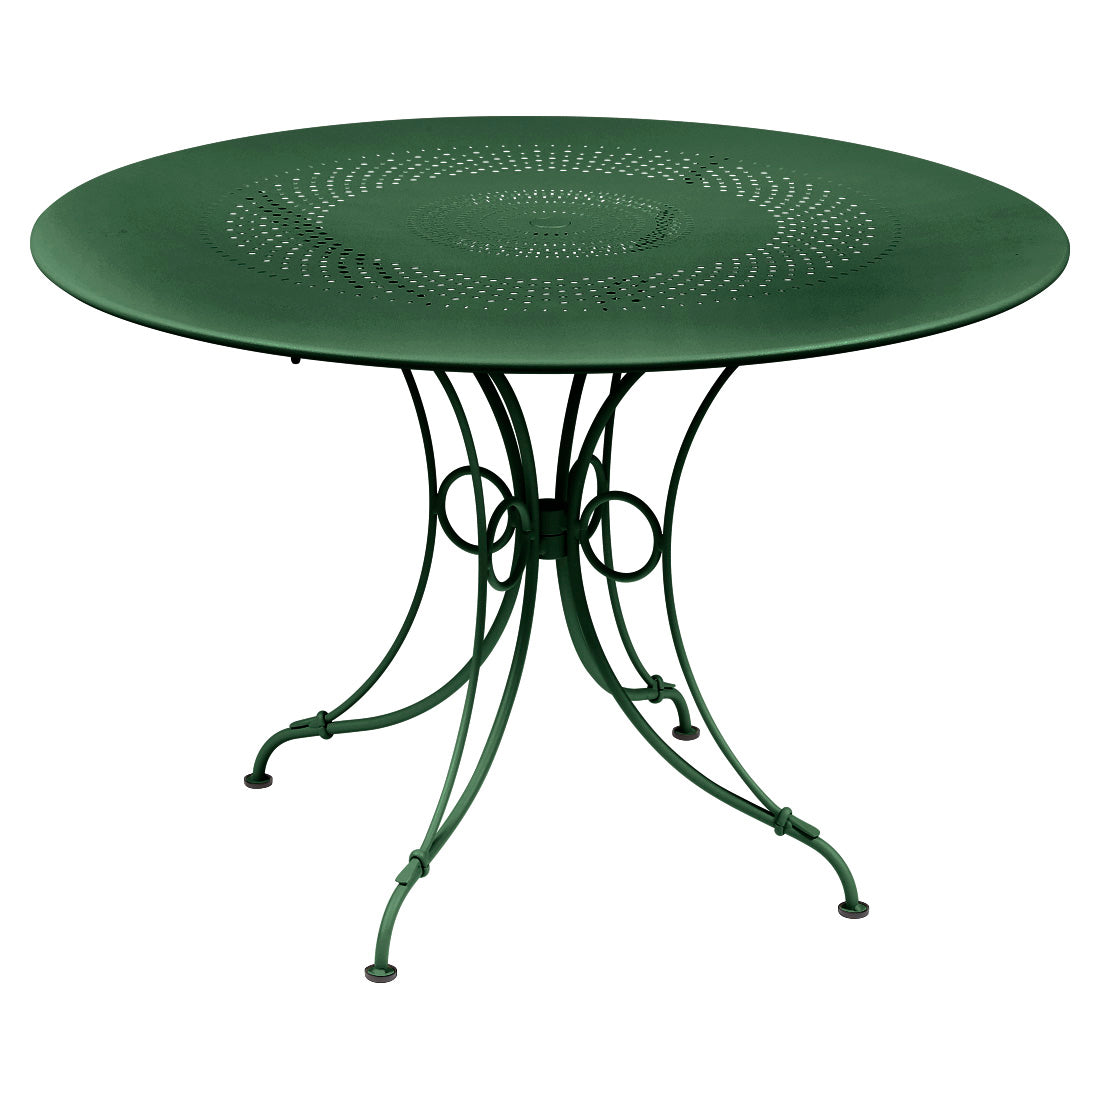 Fermob 1900 46 inch Round Dining Table - bonmarche